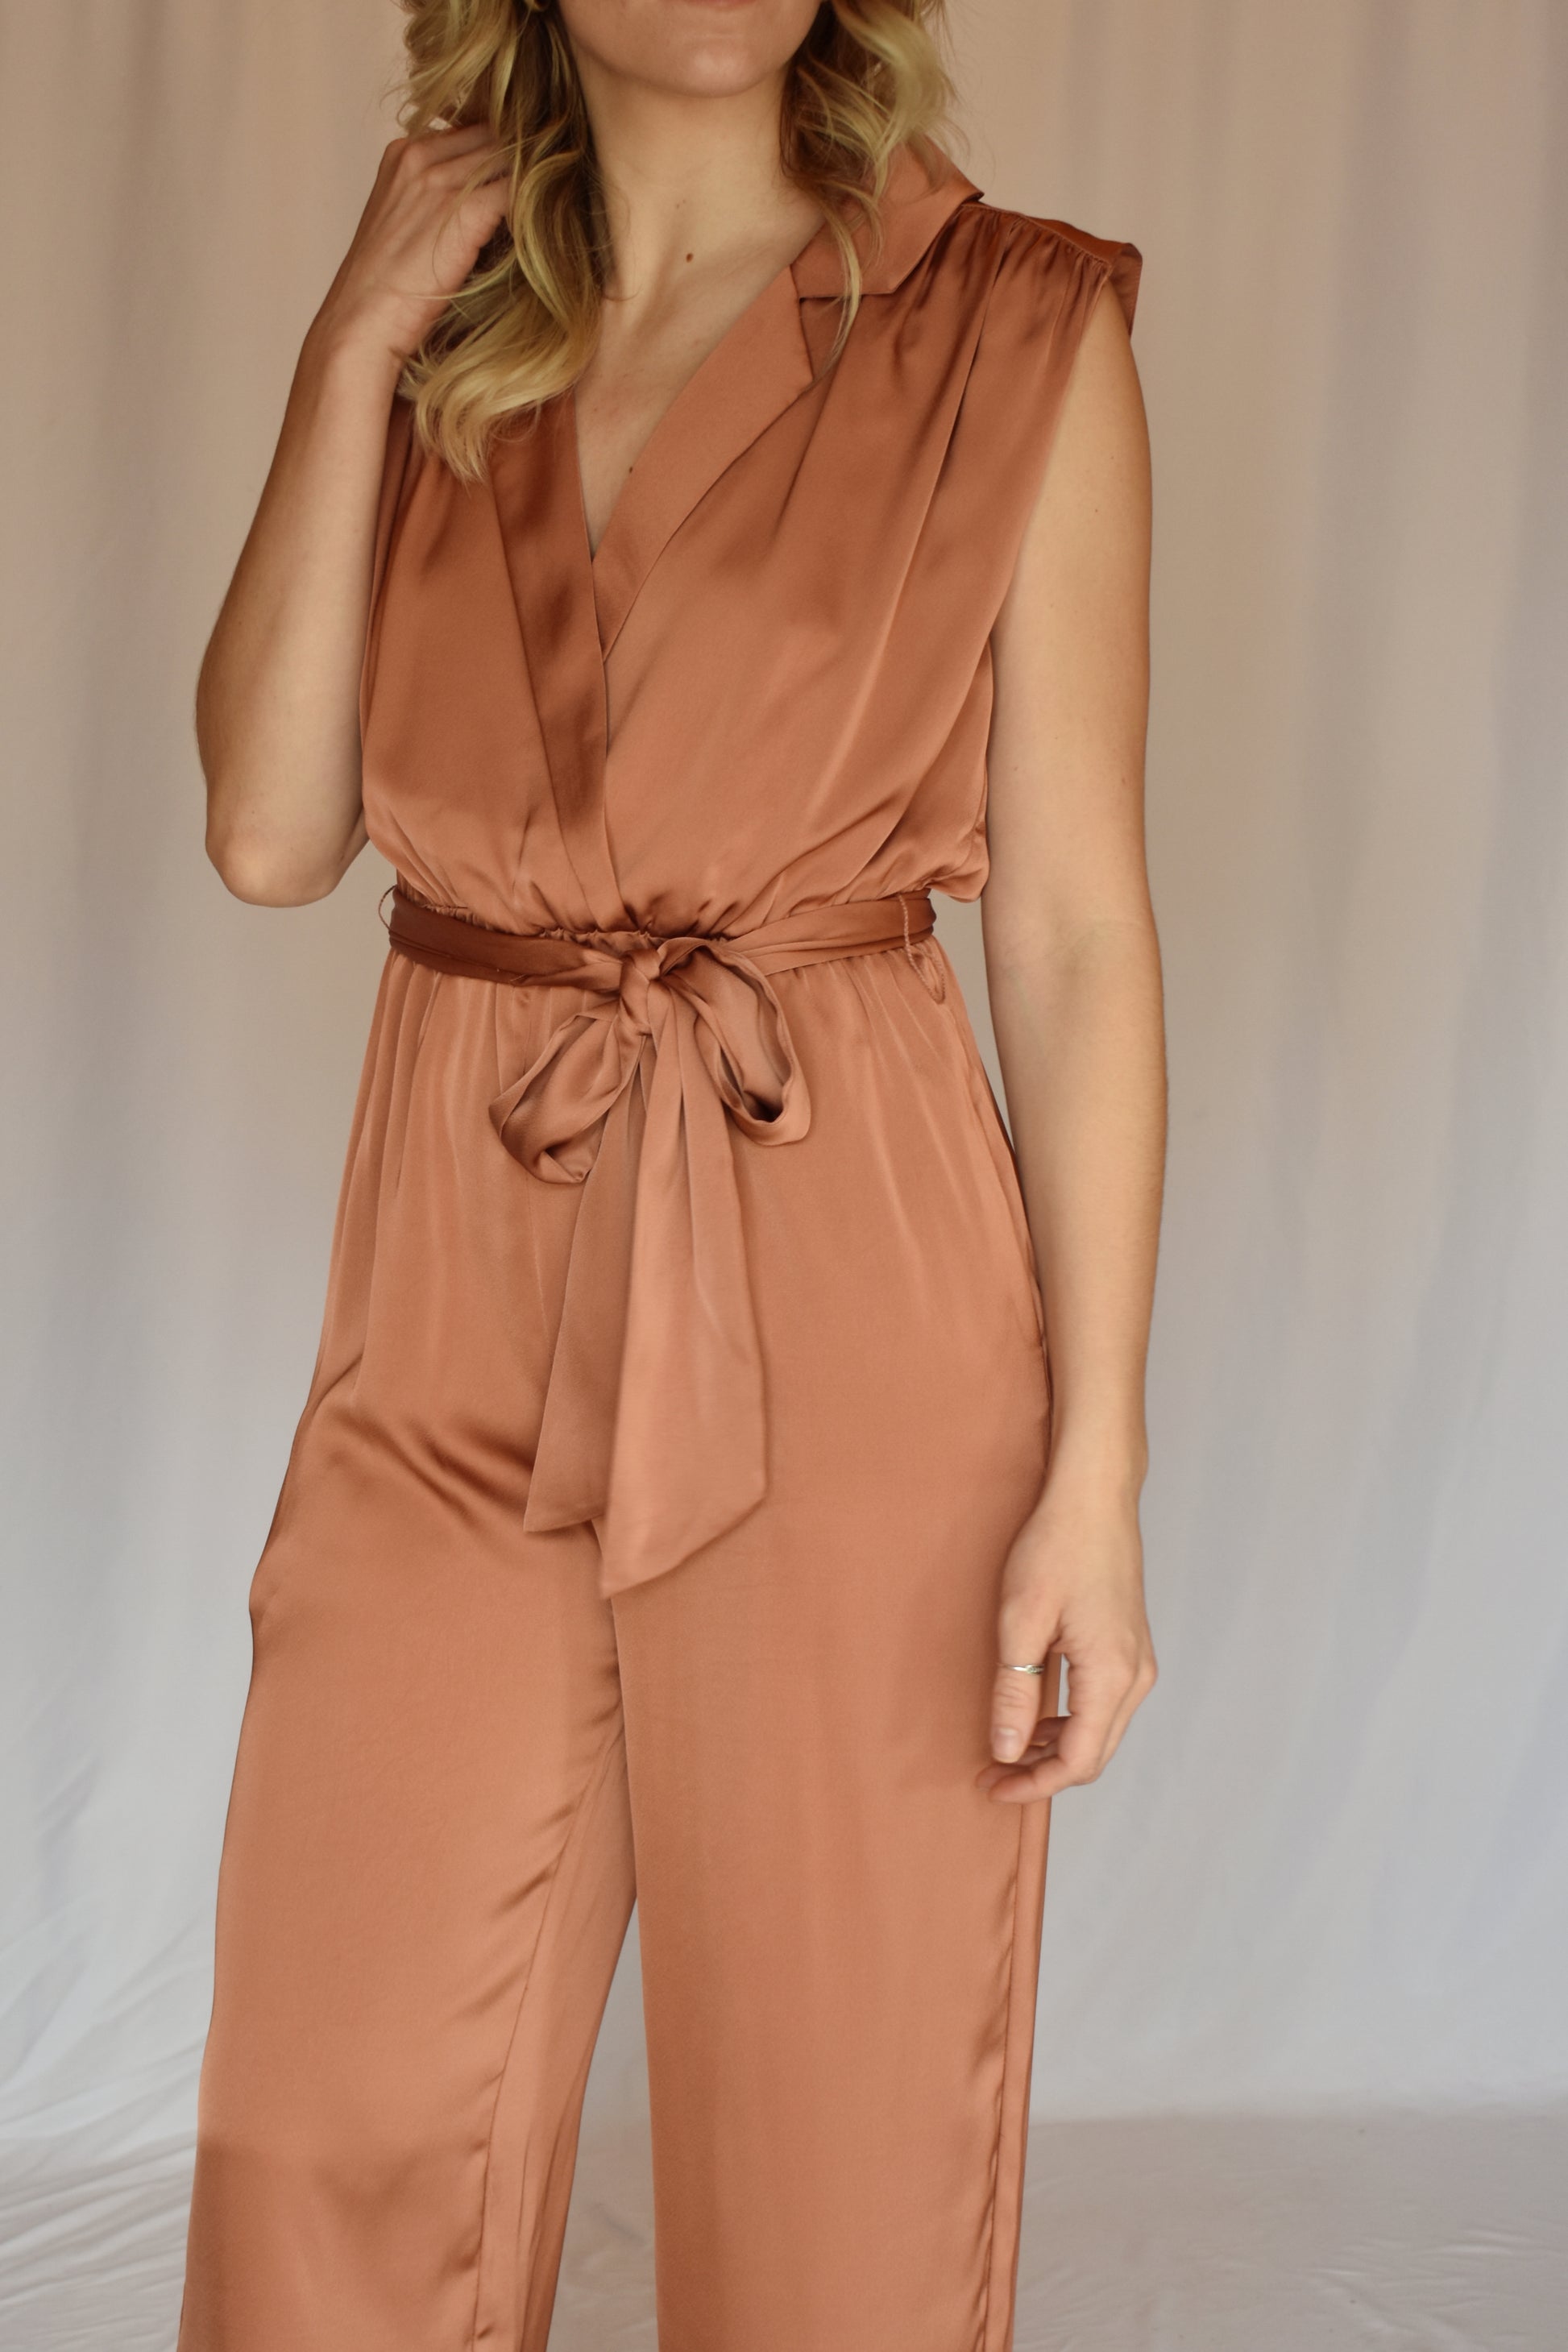 sienna rose satin sleeveless wedding guest jumpsuit us online boutique –  The Revival